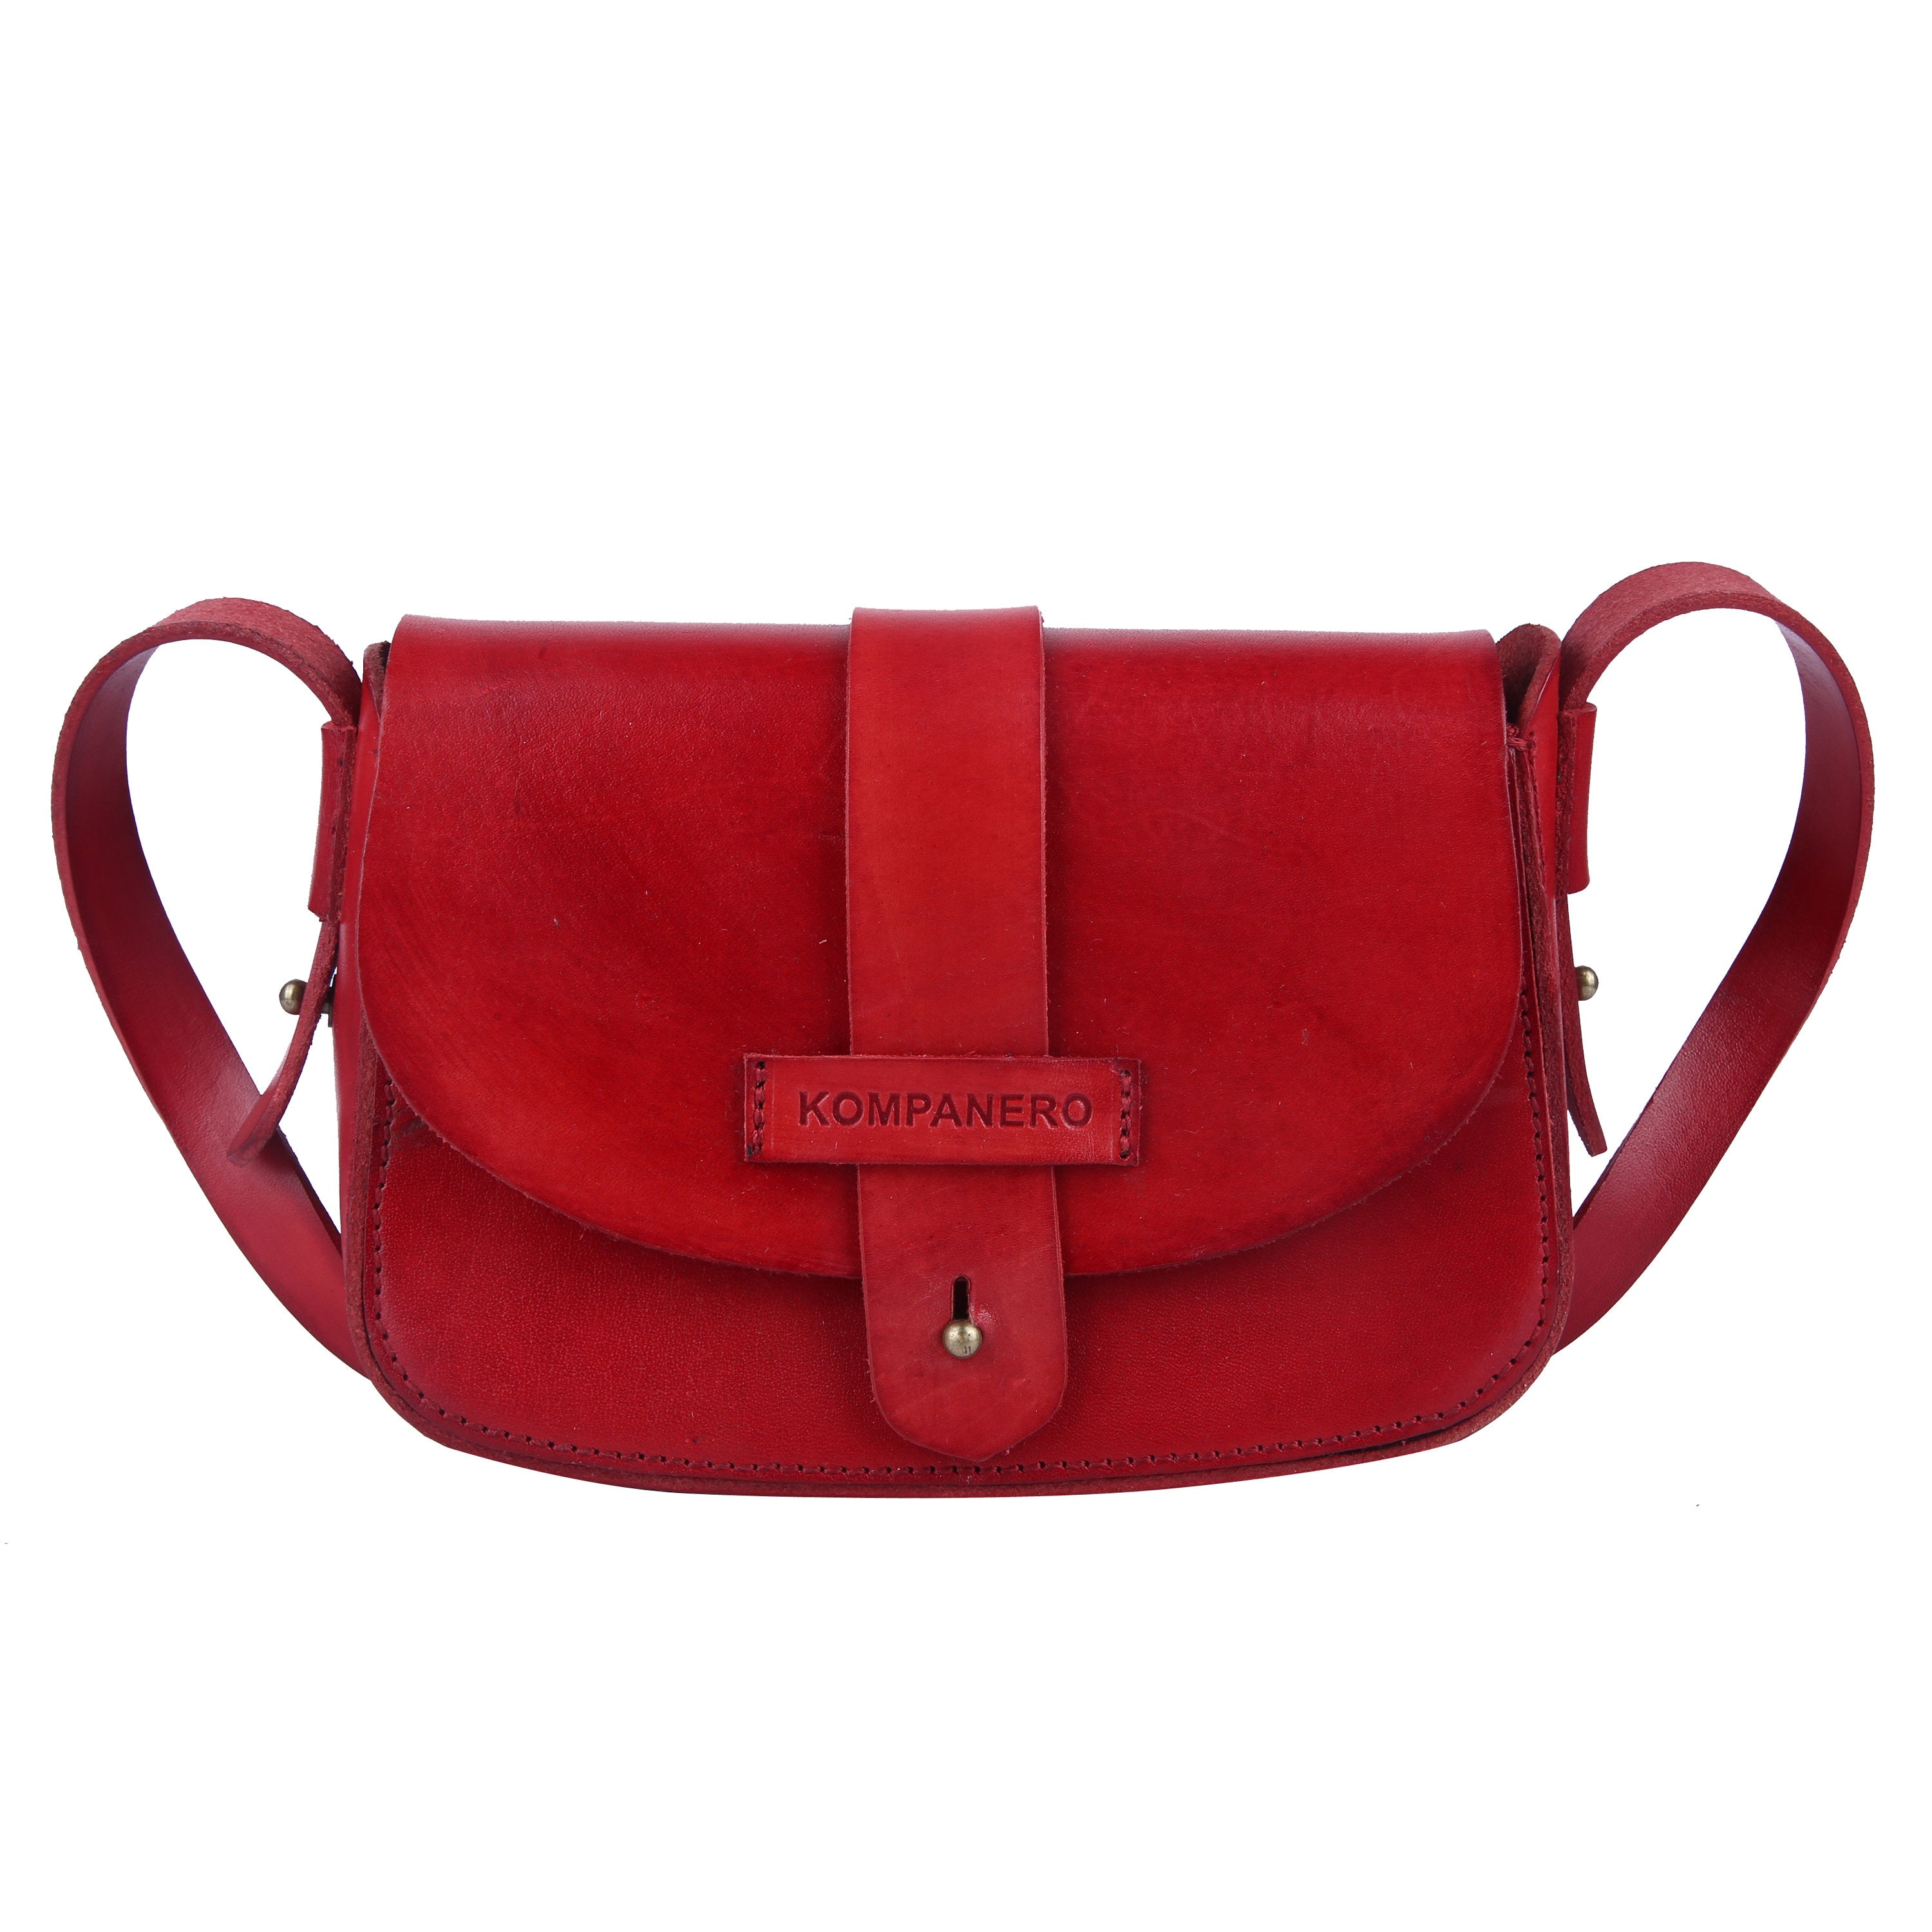 Adrienne - The Sling Bag - Handcrafted Leather bags – Kompanero